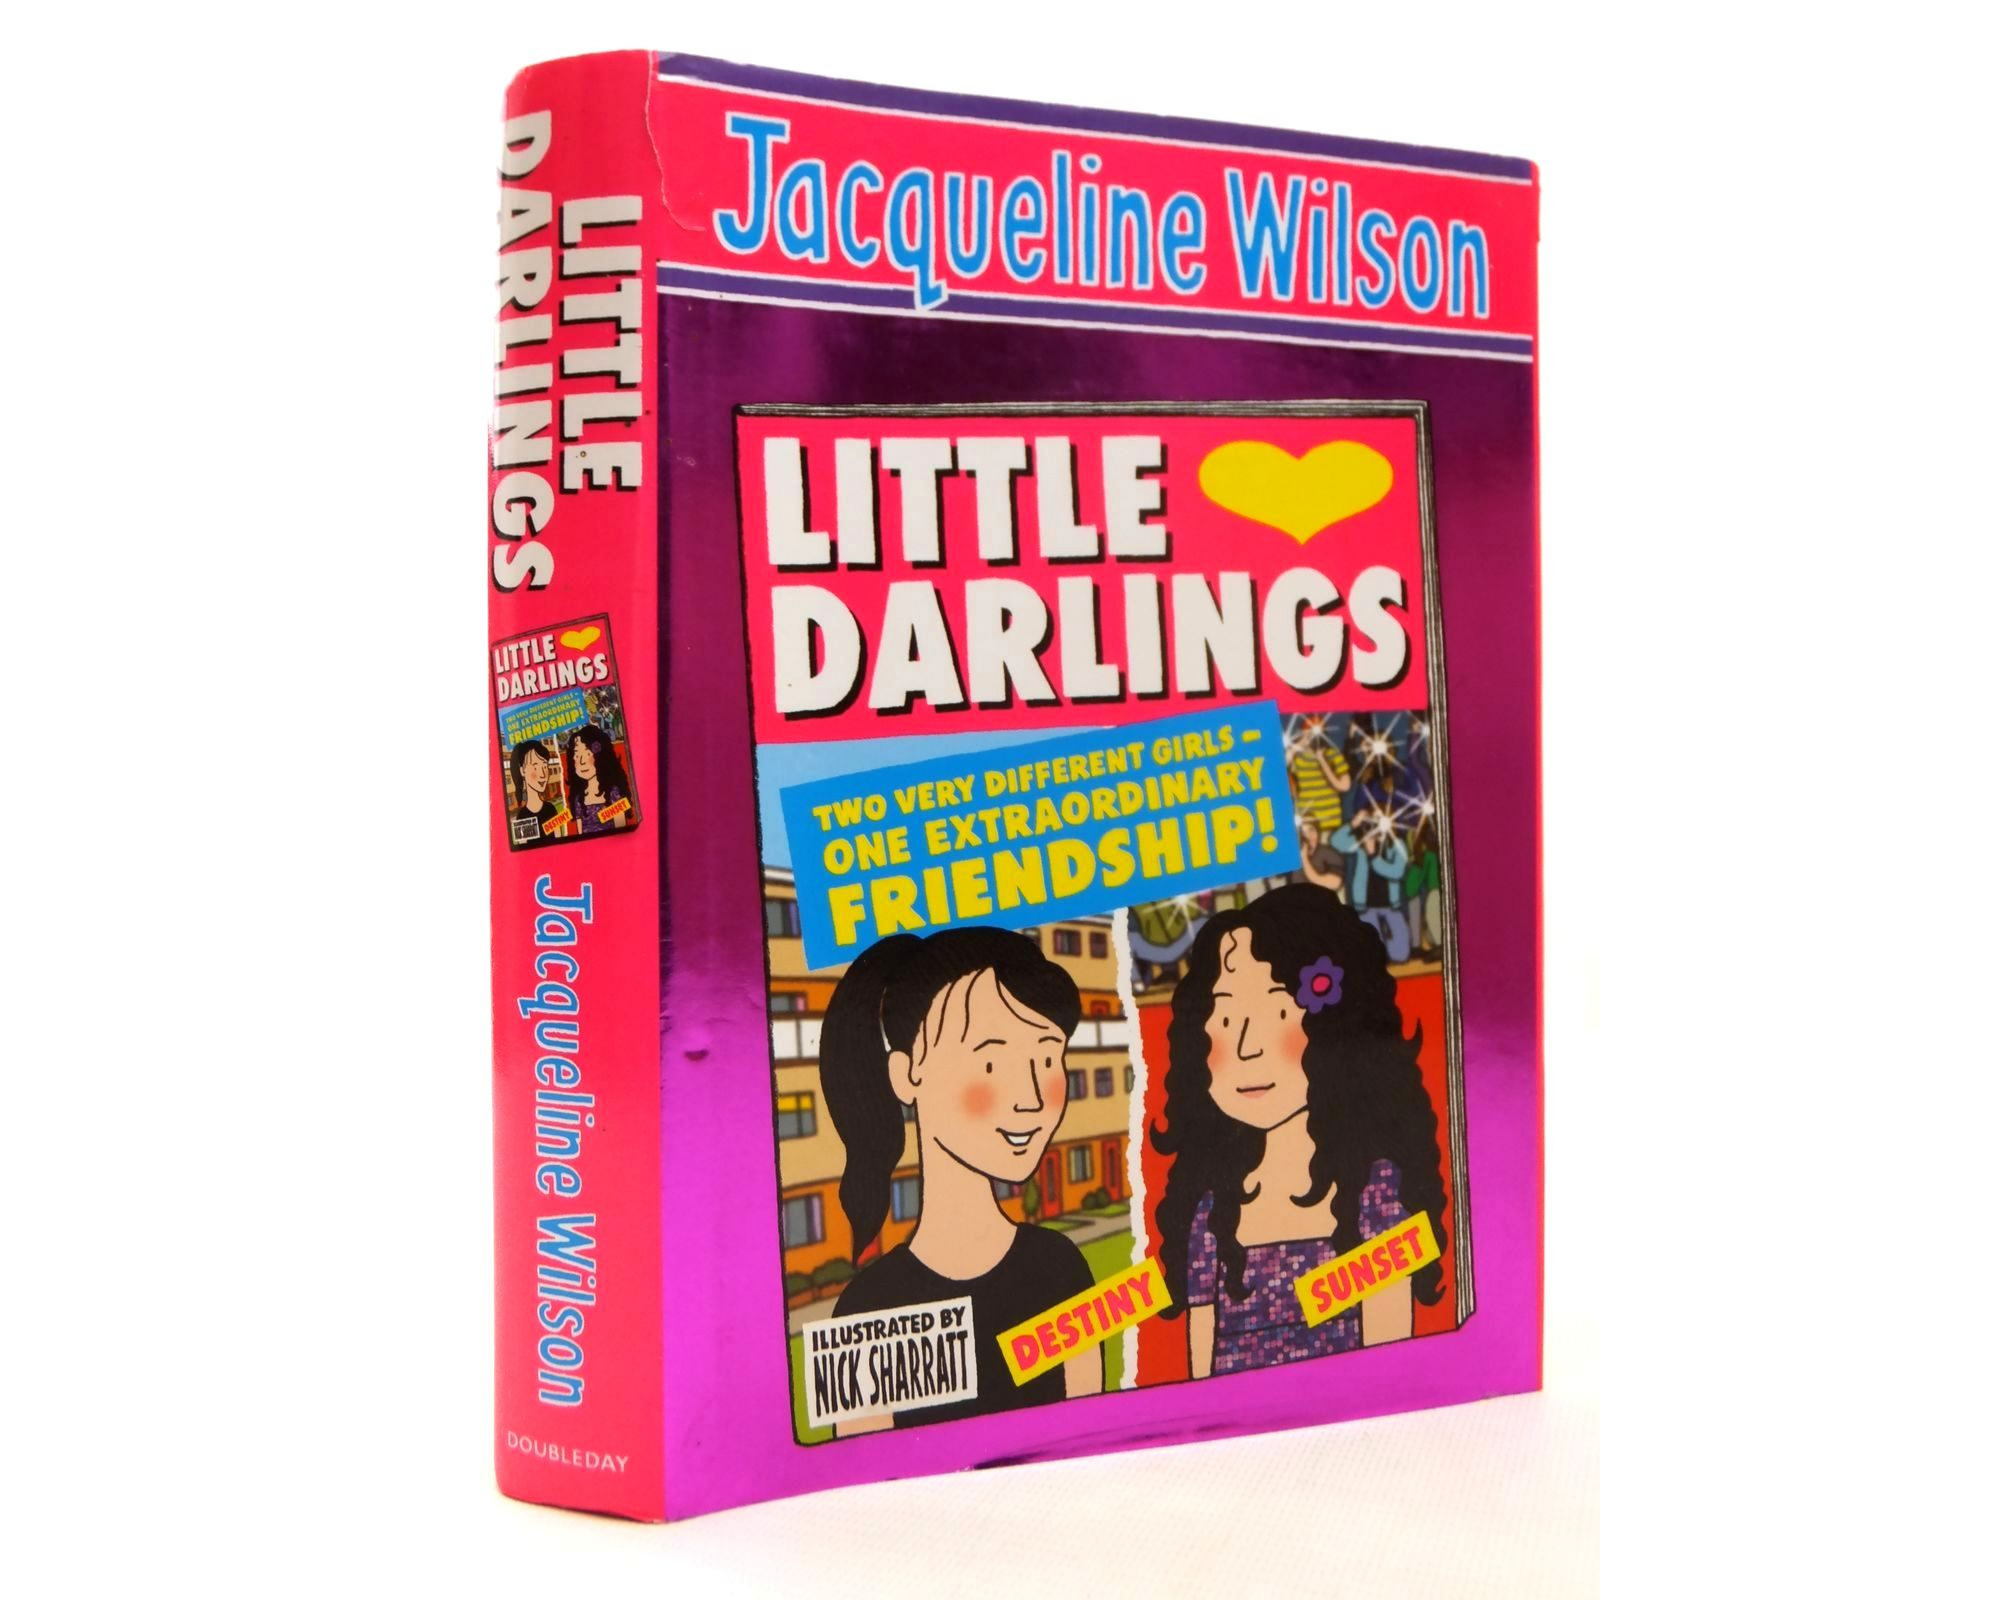 Book of the week - Little Darling by Jacqueline Wilson